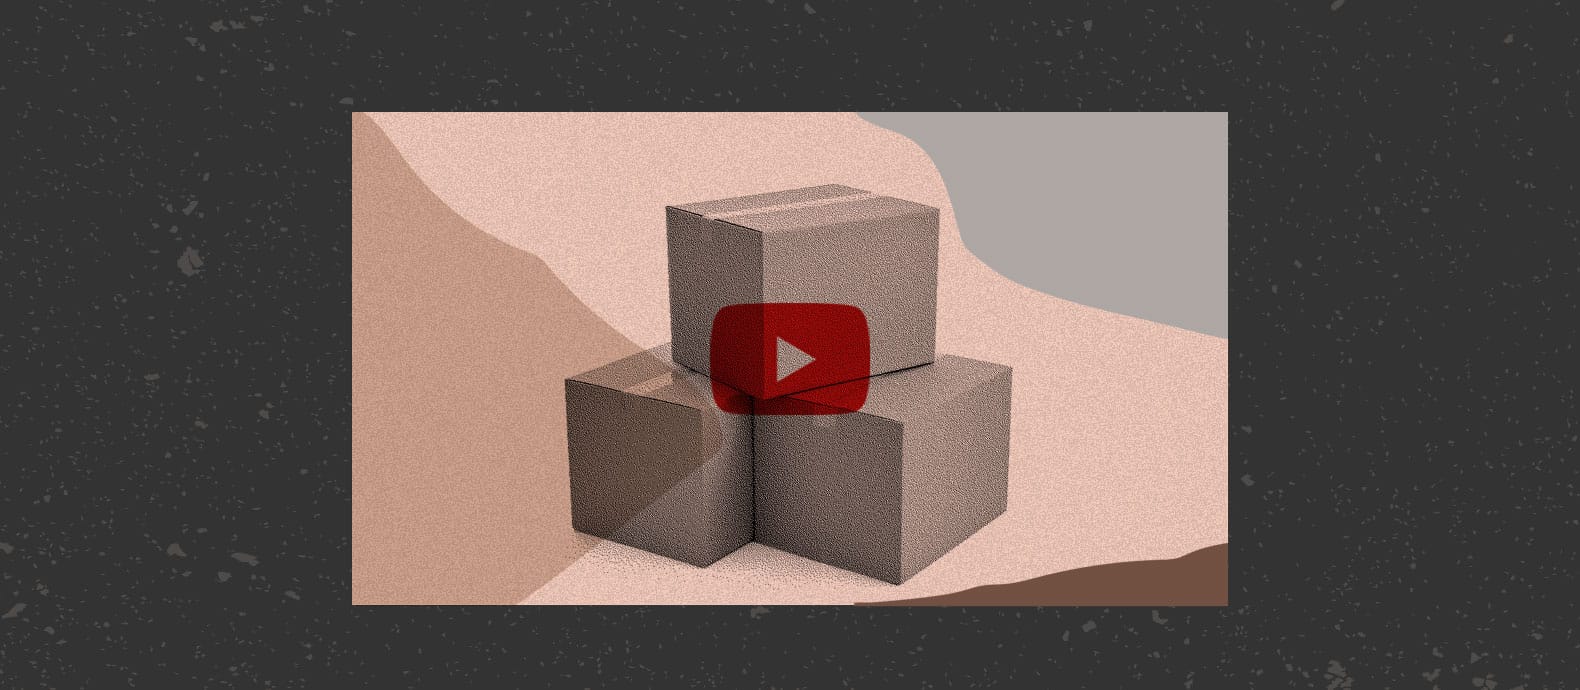 How brands can seize online video opportunity on Youtube